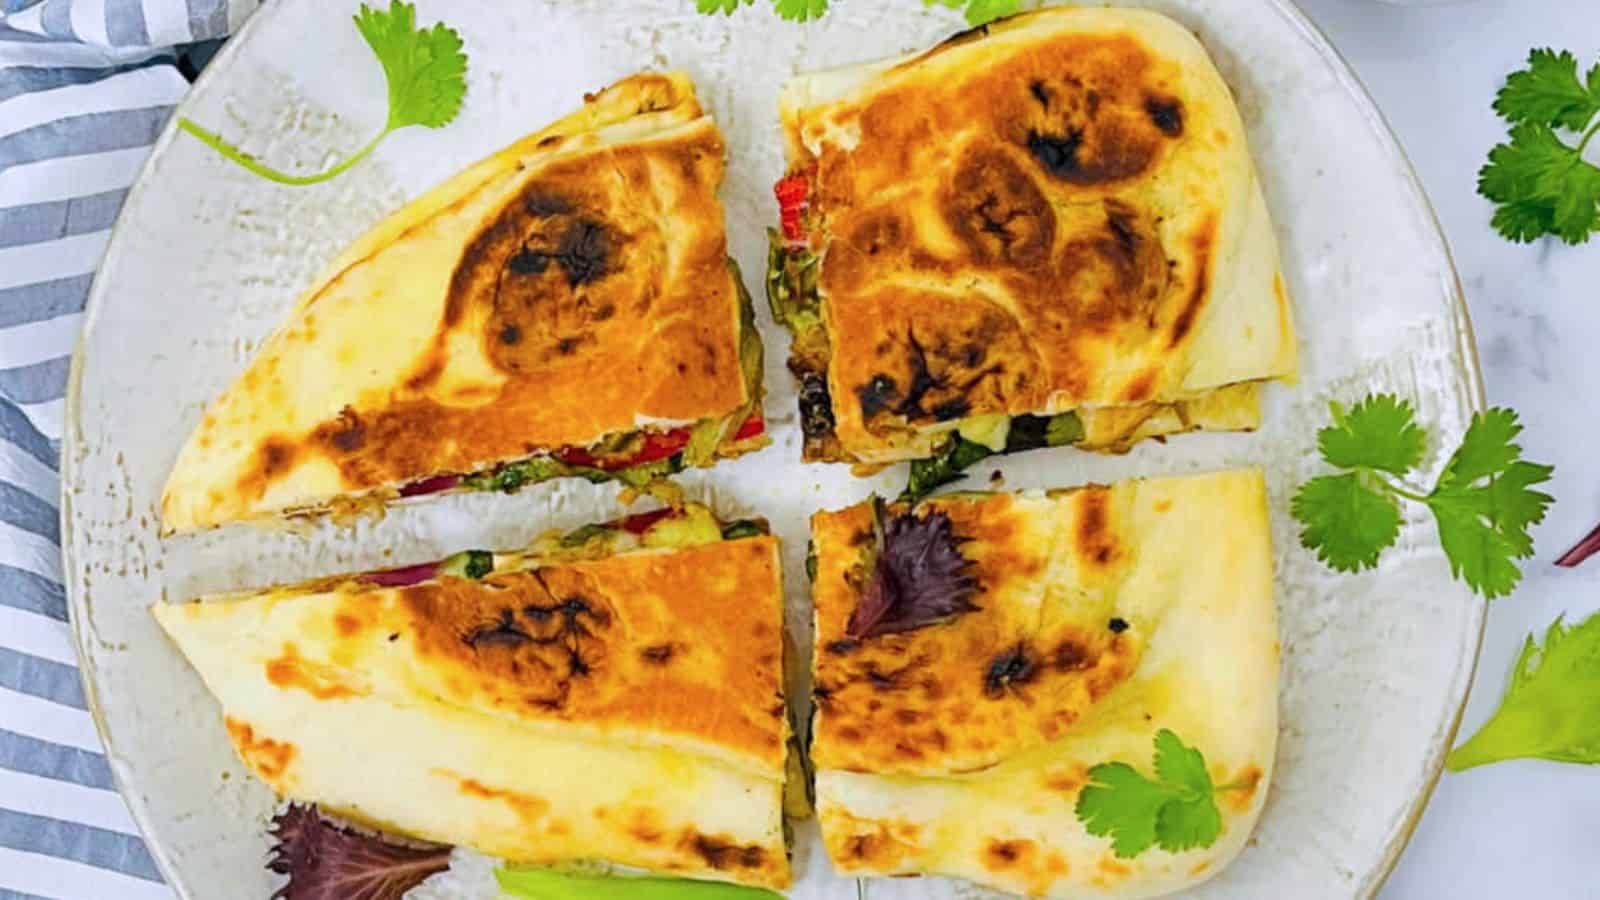 <p>Now, that's a fun twist on Indian cuisine - a Chicken Tikka Naanwich! It packs all the flavors of delightful chicken tikka but in a lunch-friendly naan. It's one of those underrated Indian dishes that will absolutely change your sandwich game.<br><strong>Get the Recipe: </strong><a href="https://easyindiancookbook.com/chicken-tikka-naanwich-naan-sandwich/?utm_source=msn&utm_medium=page&utm_campaign=msn">Chicken Tikka Naanwich</a></p>